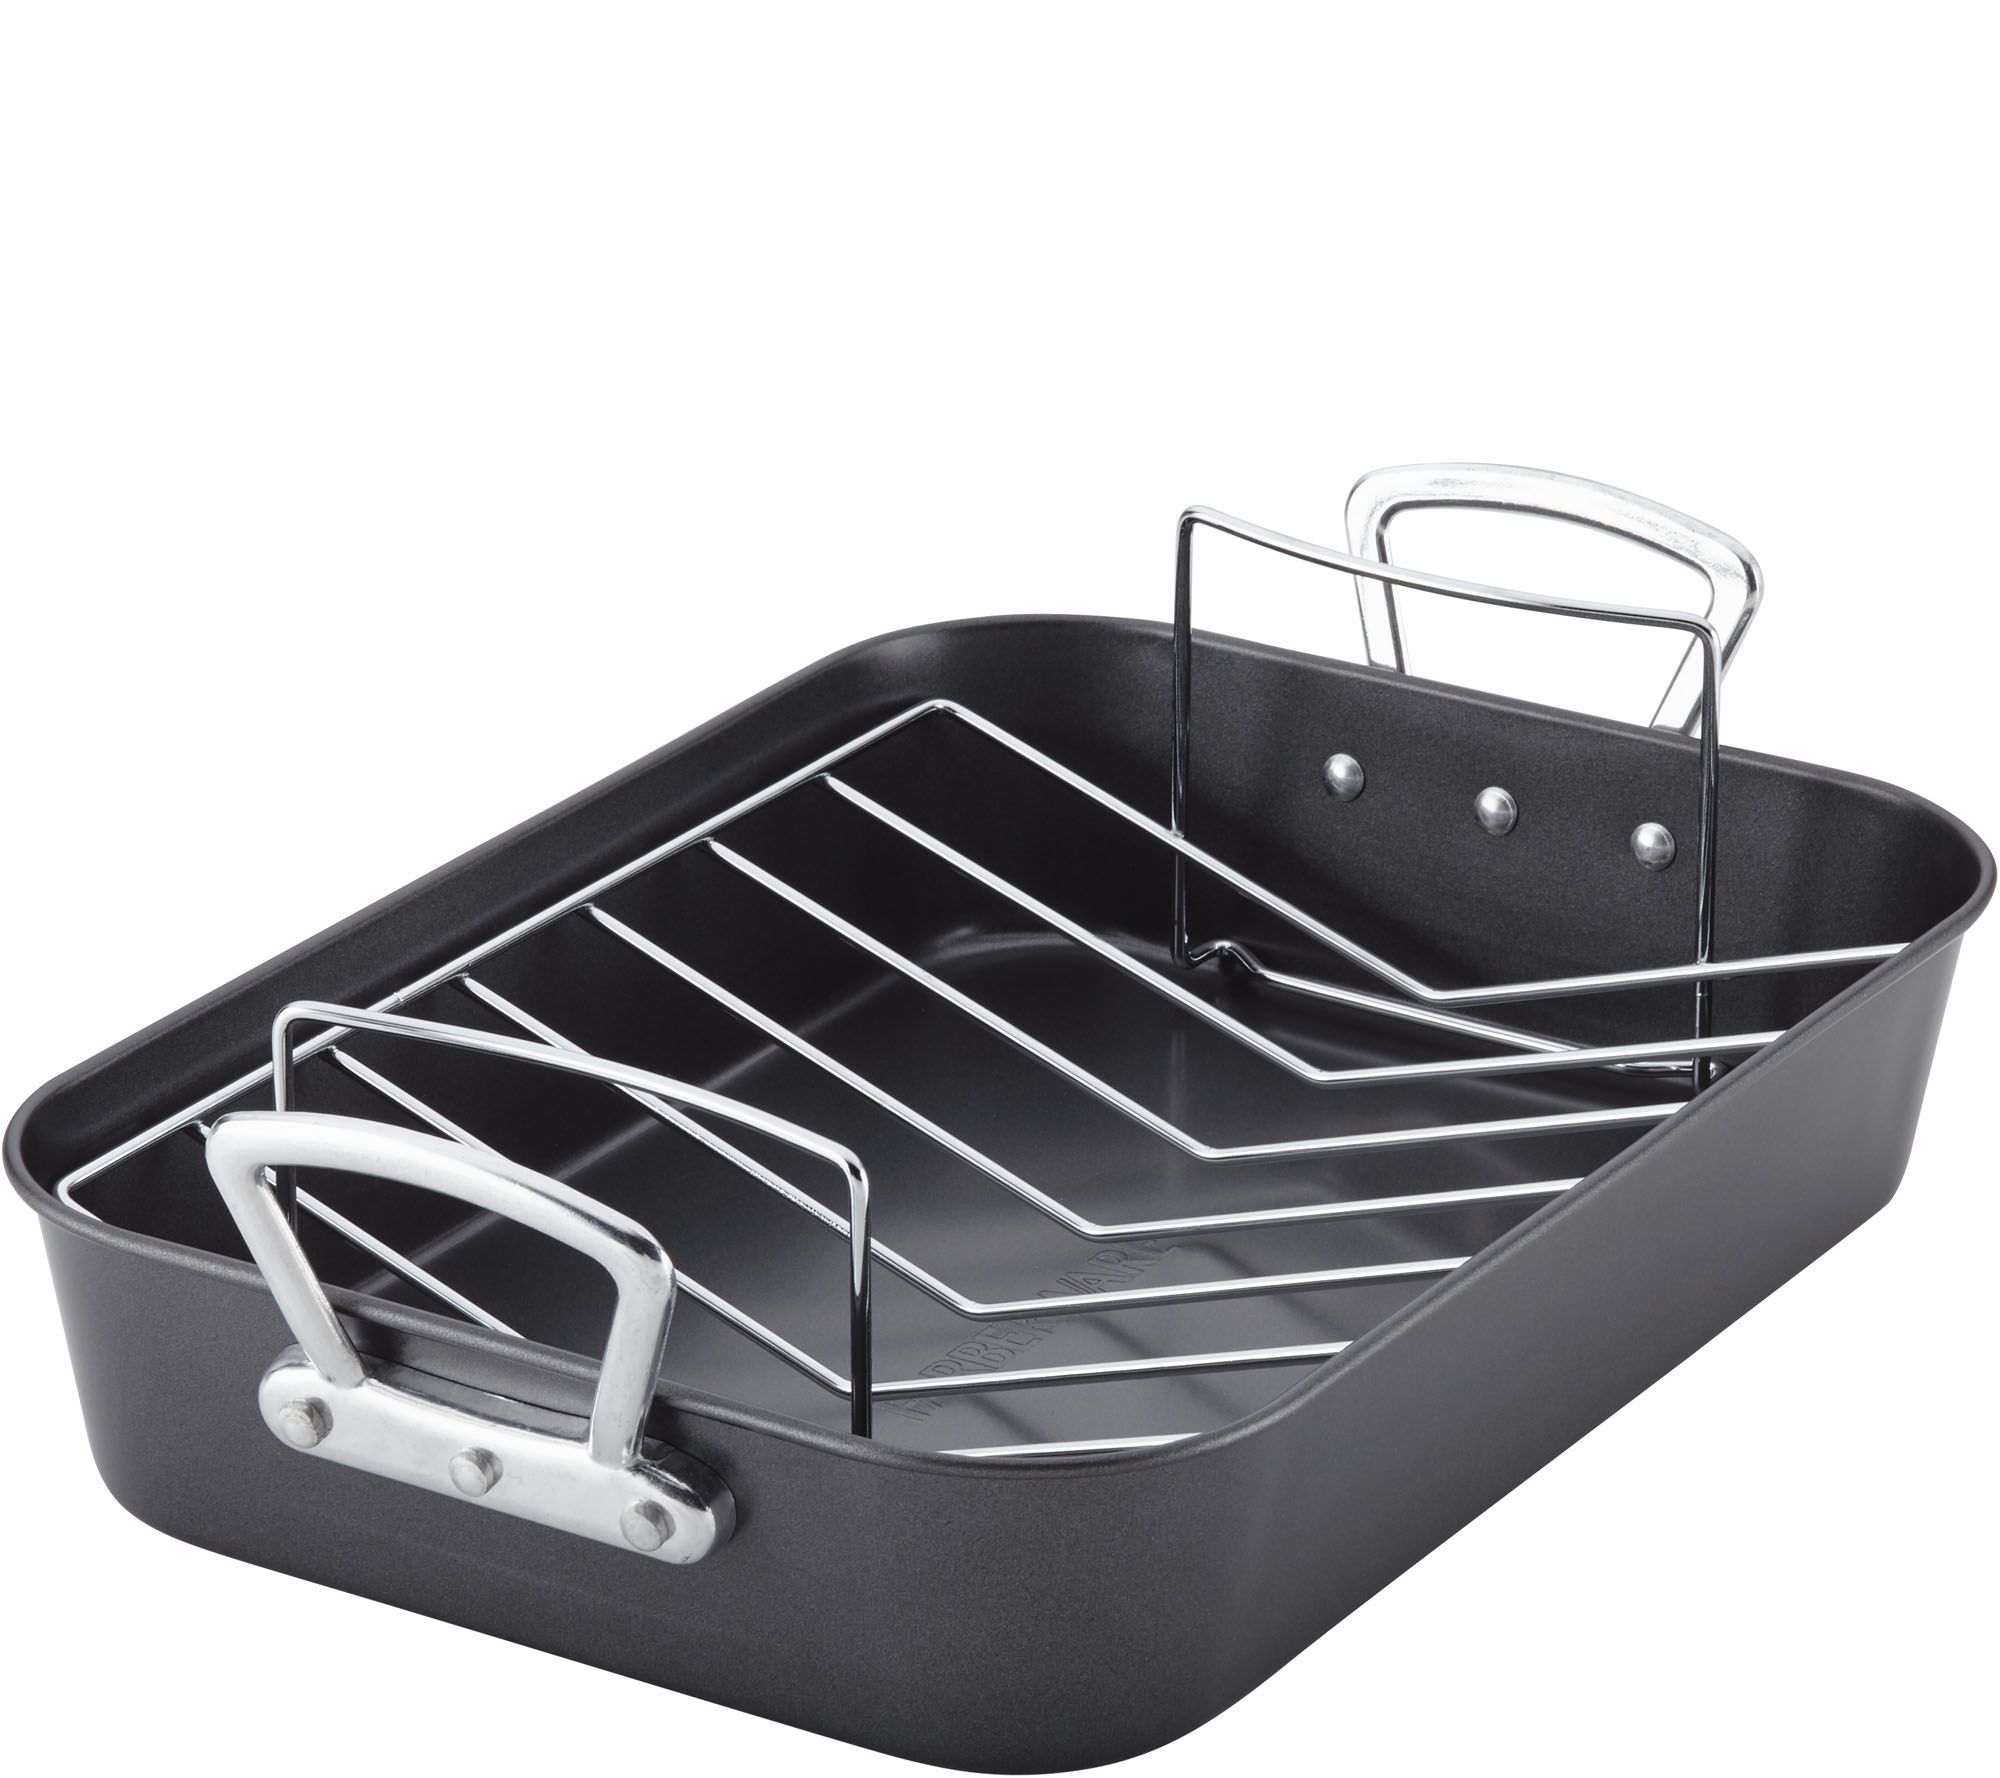 Prestige non-Stick Oven Roaster with Rack. Roasting Pan. Open dish